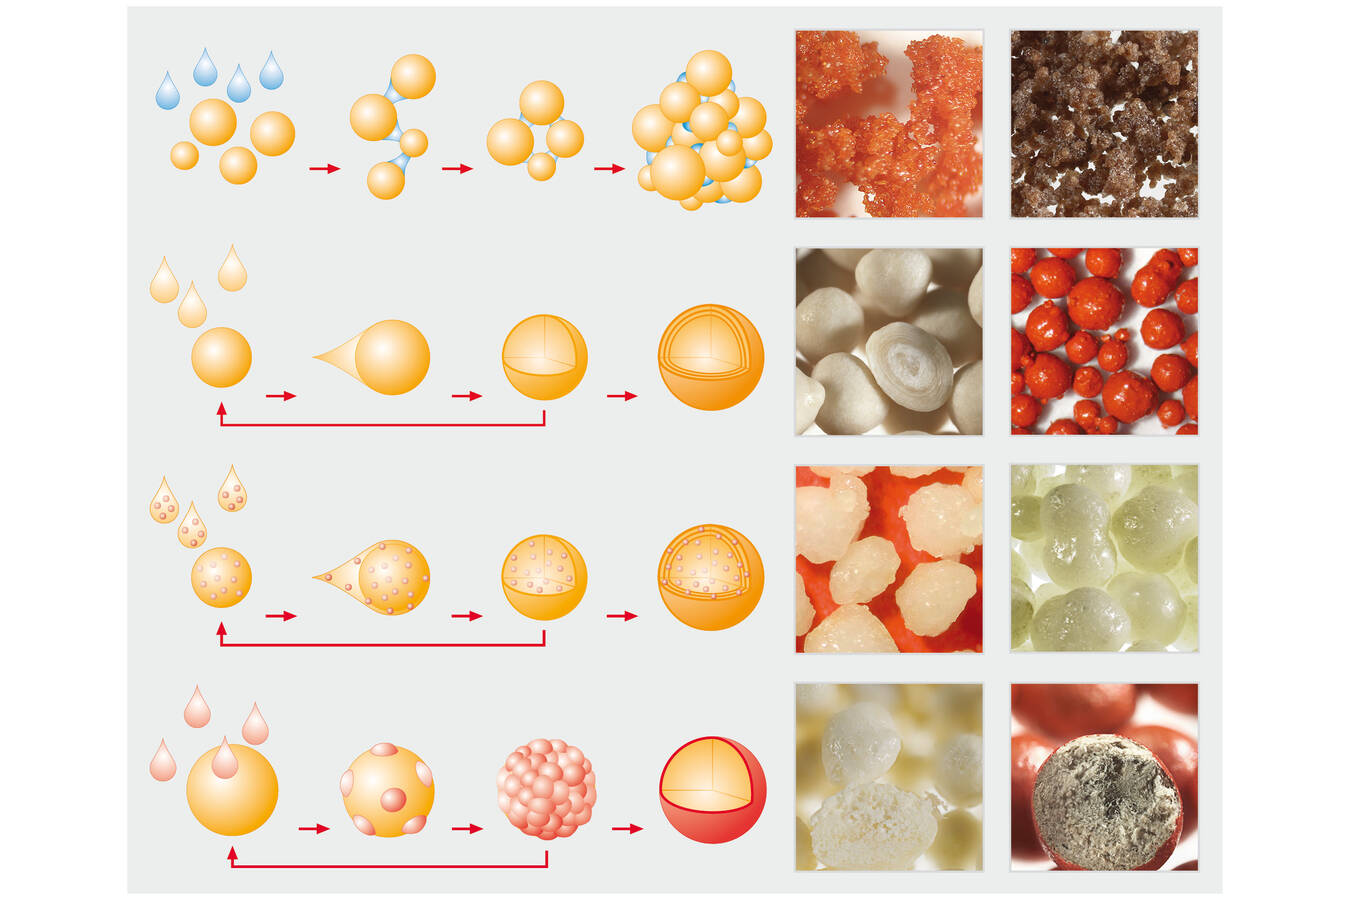 Figure 1: Spray agglomeration, spray granulation, microencapsulation and spray coating give powders and liquids improved properties for easier handling and diverse applications.